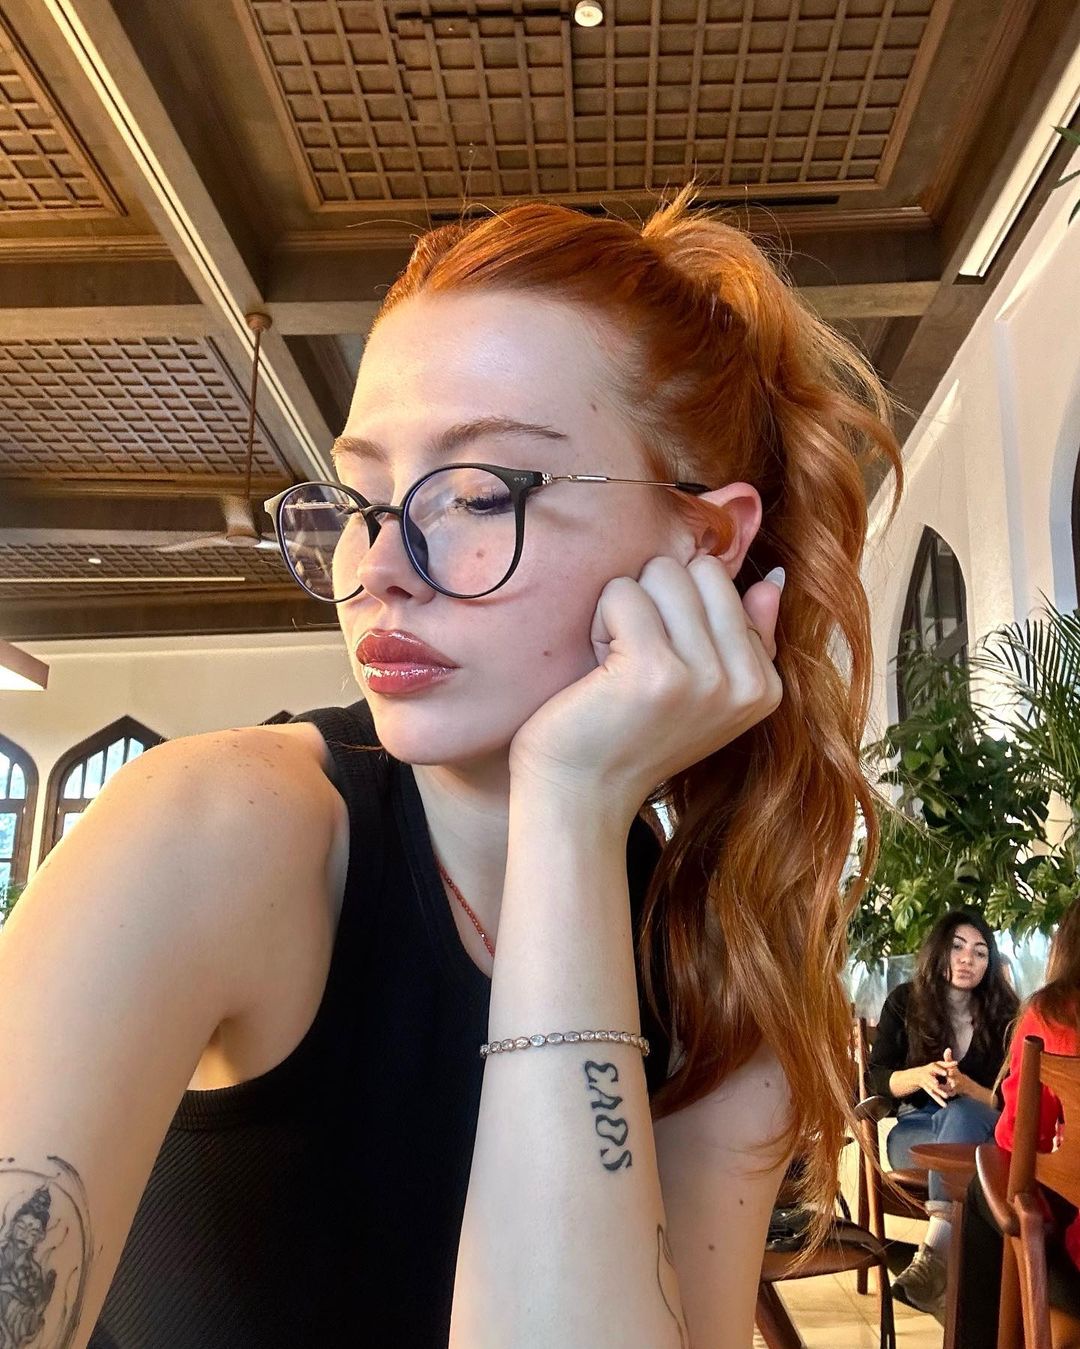 A contemplative woman with red hair sitting in a café